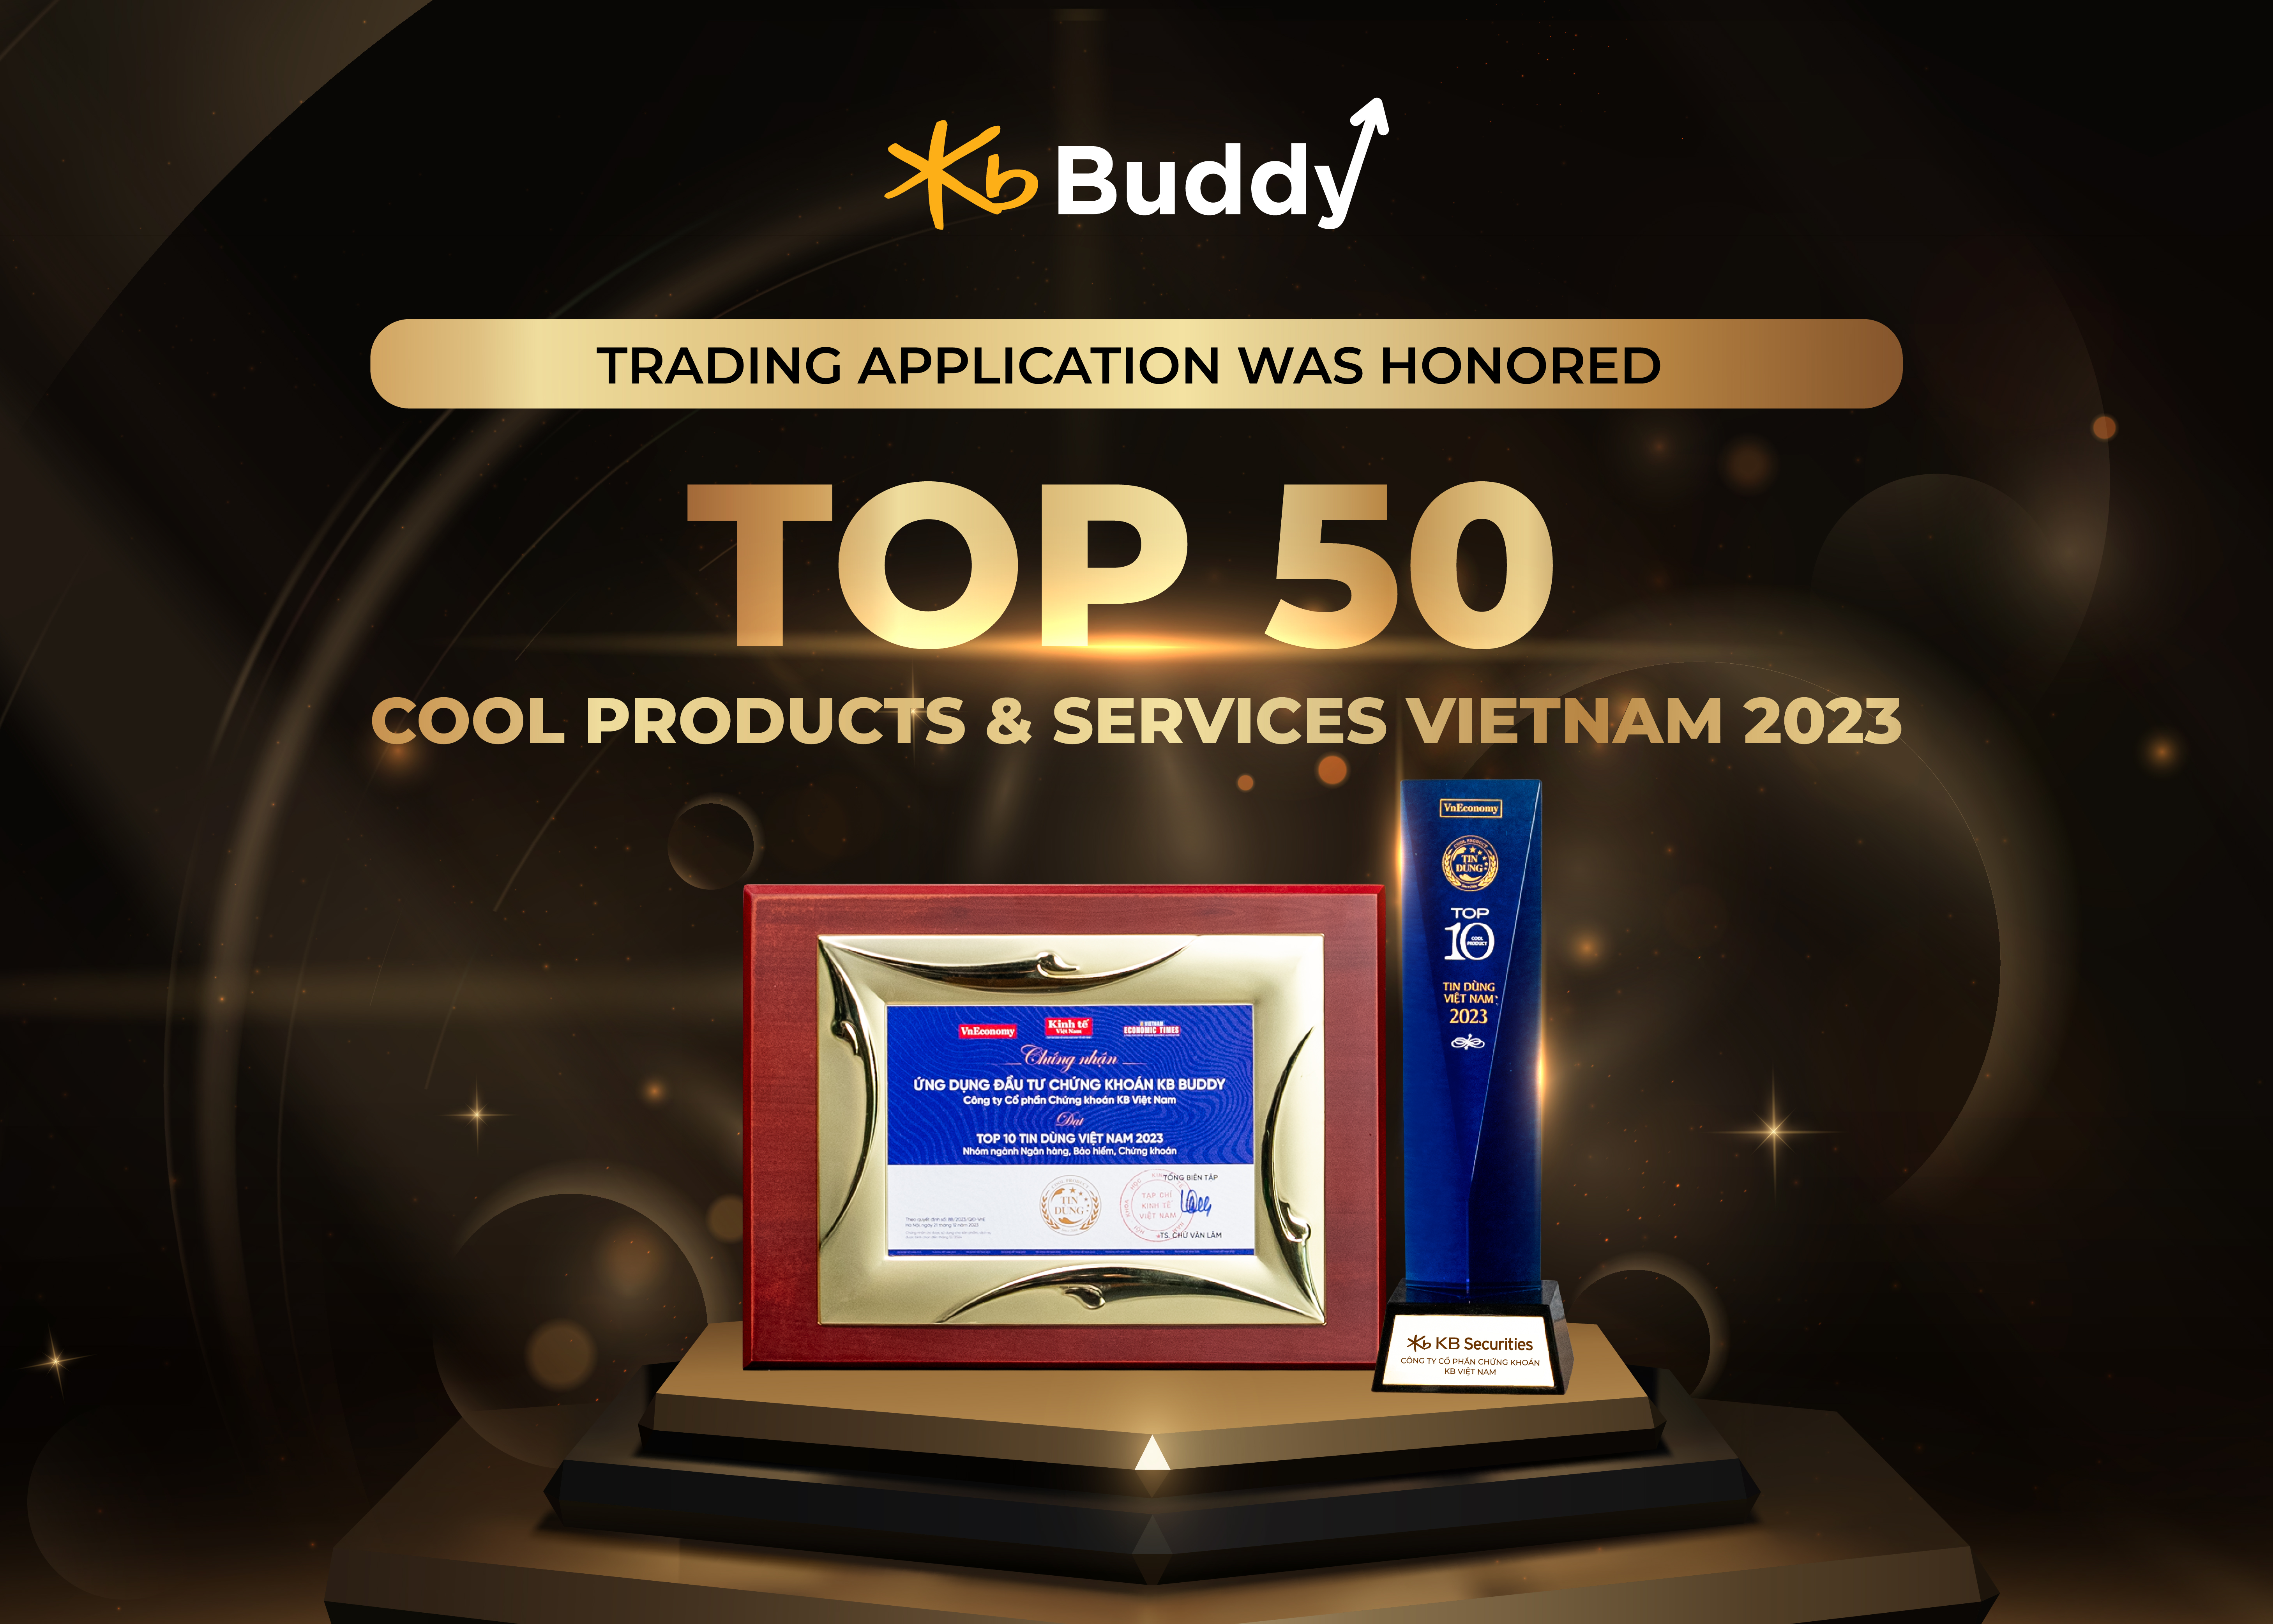 KB Buddy - The securities investment application honored the Top 50 reliable products and services in Vietnam